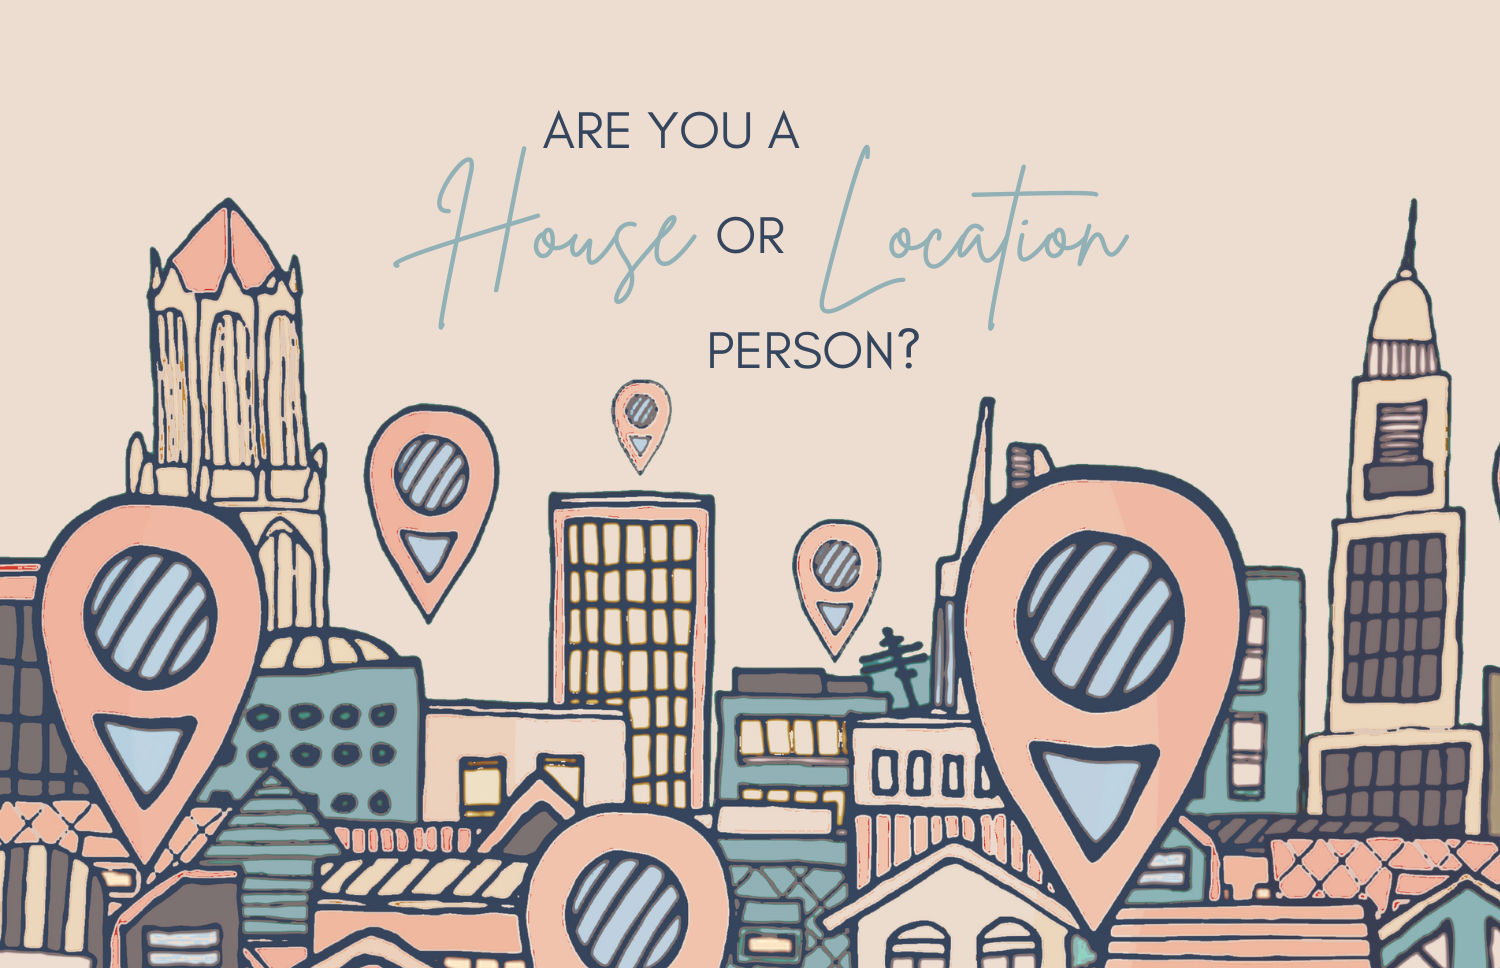 Are You A House Or Location Person